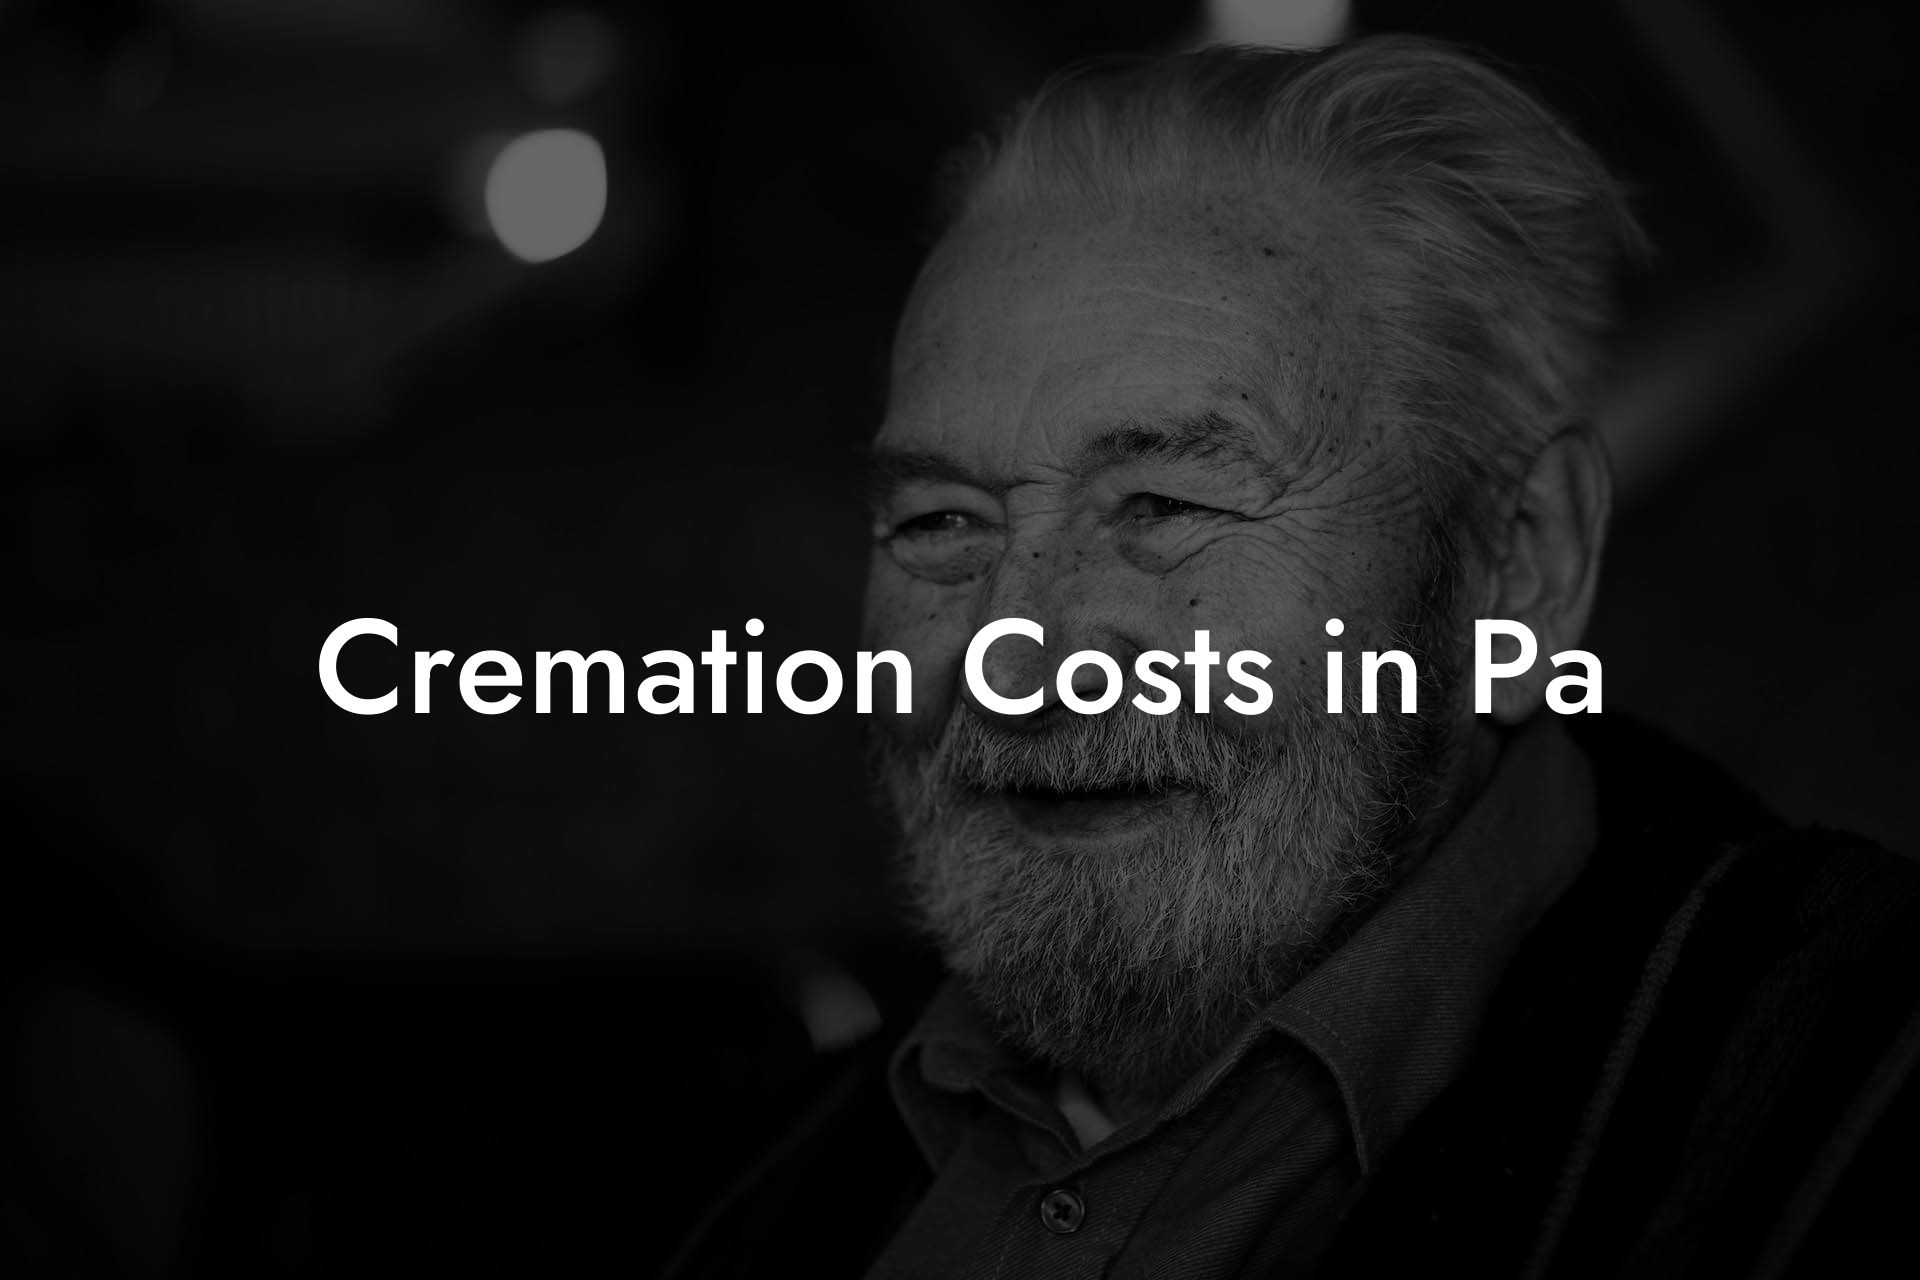 Cremation Costs in Pa